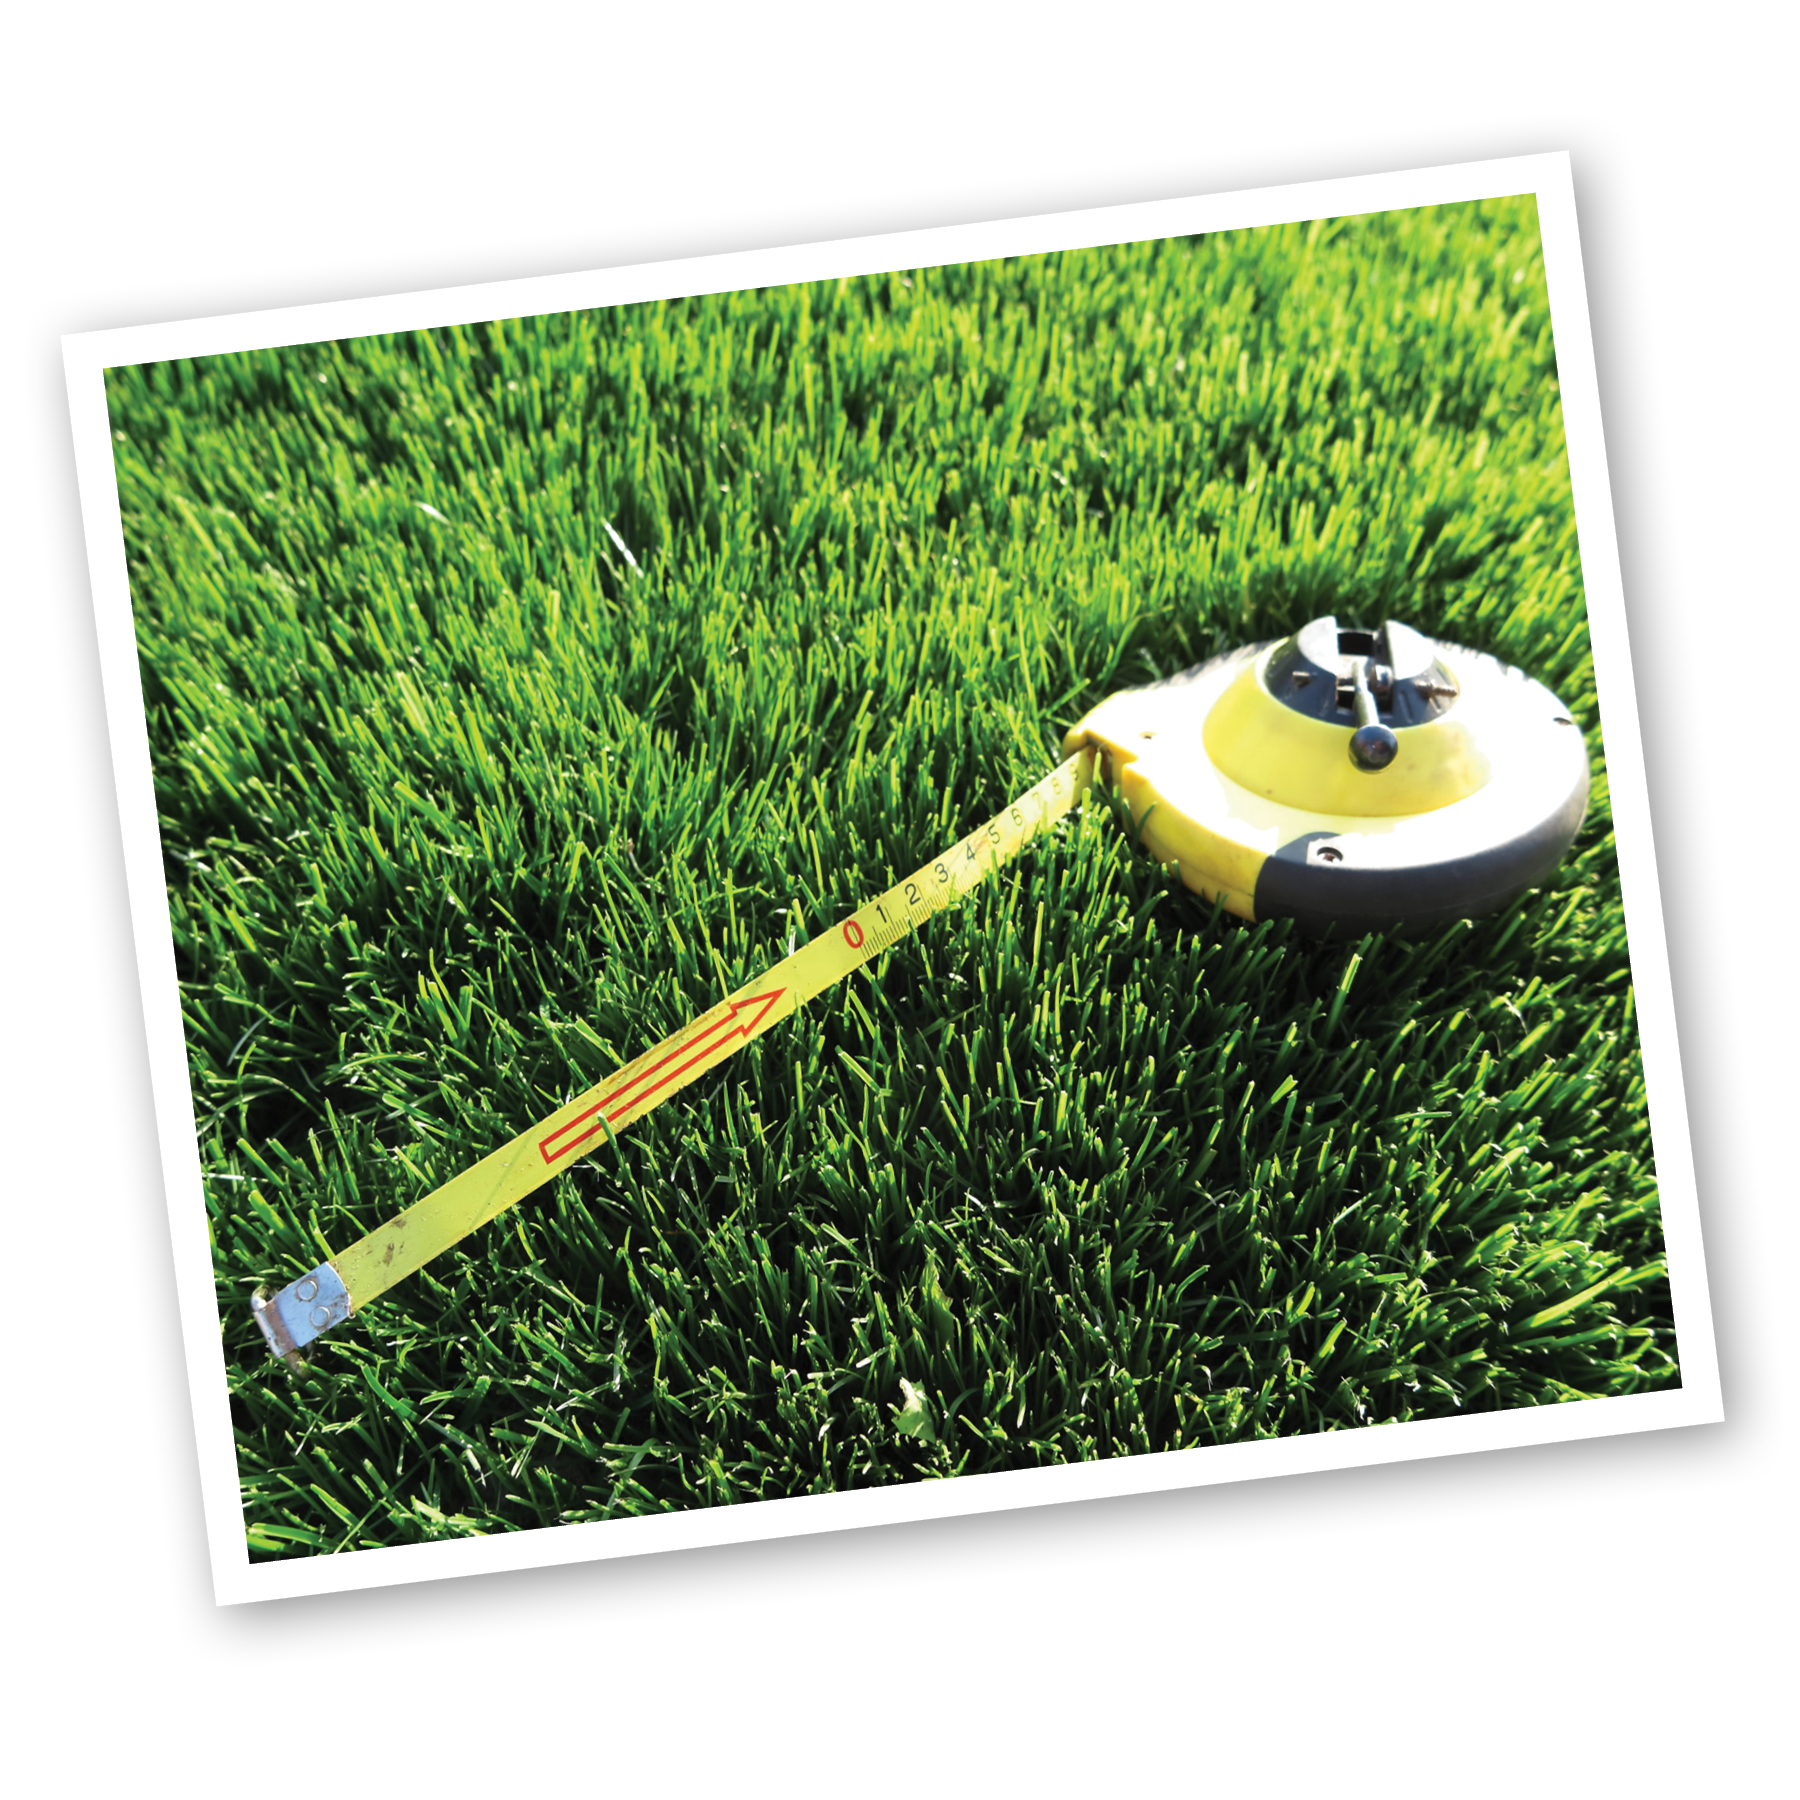 tape measure laying in grass